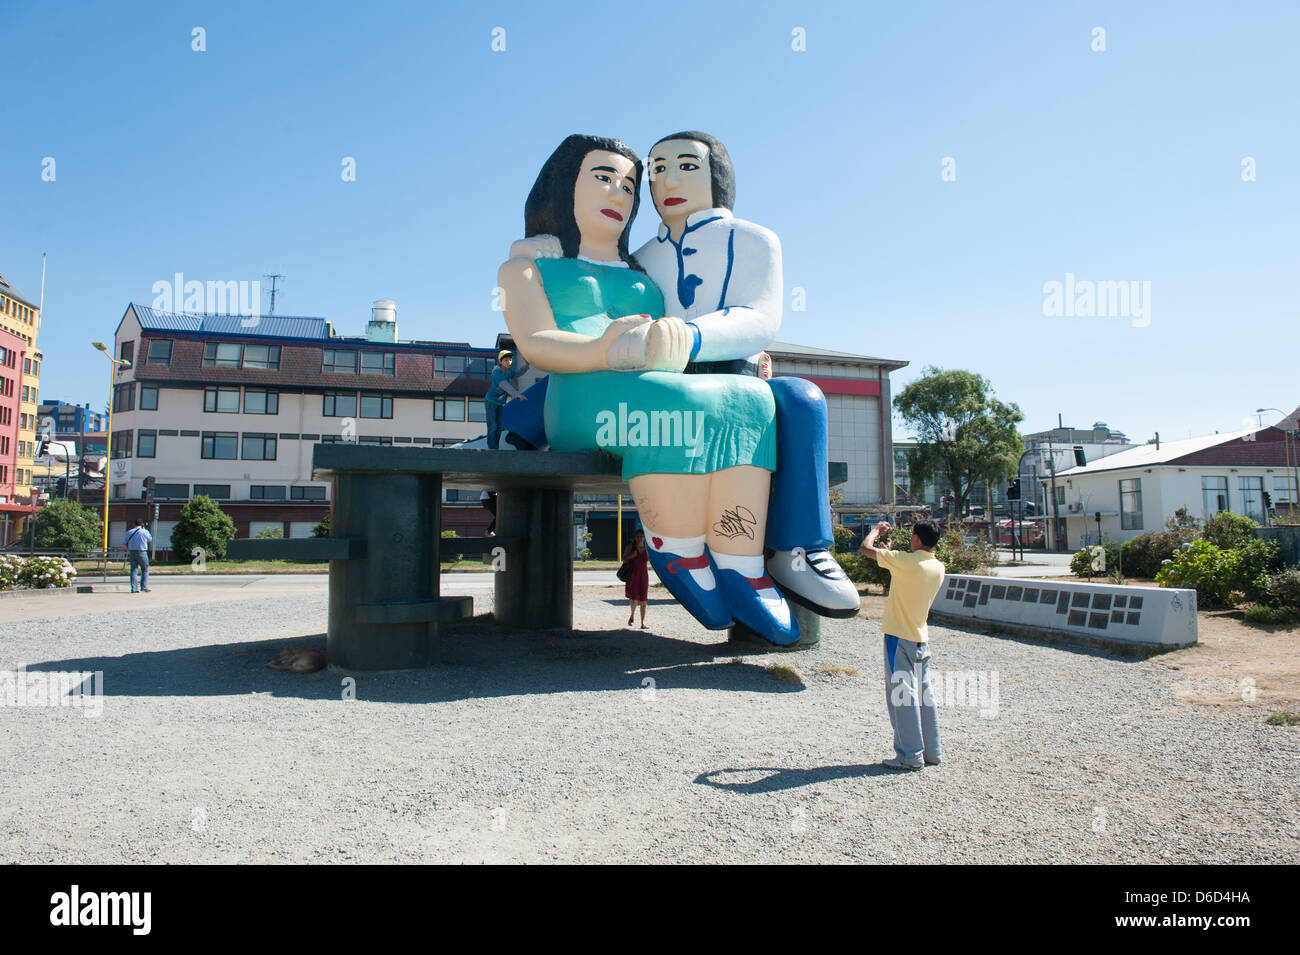 Tourist taking pictures at a tourist attraction sculpture in Puerto Montt, Chile Stock Photo